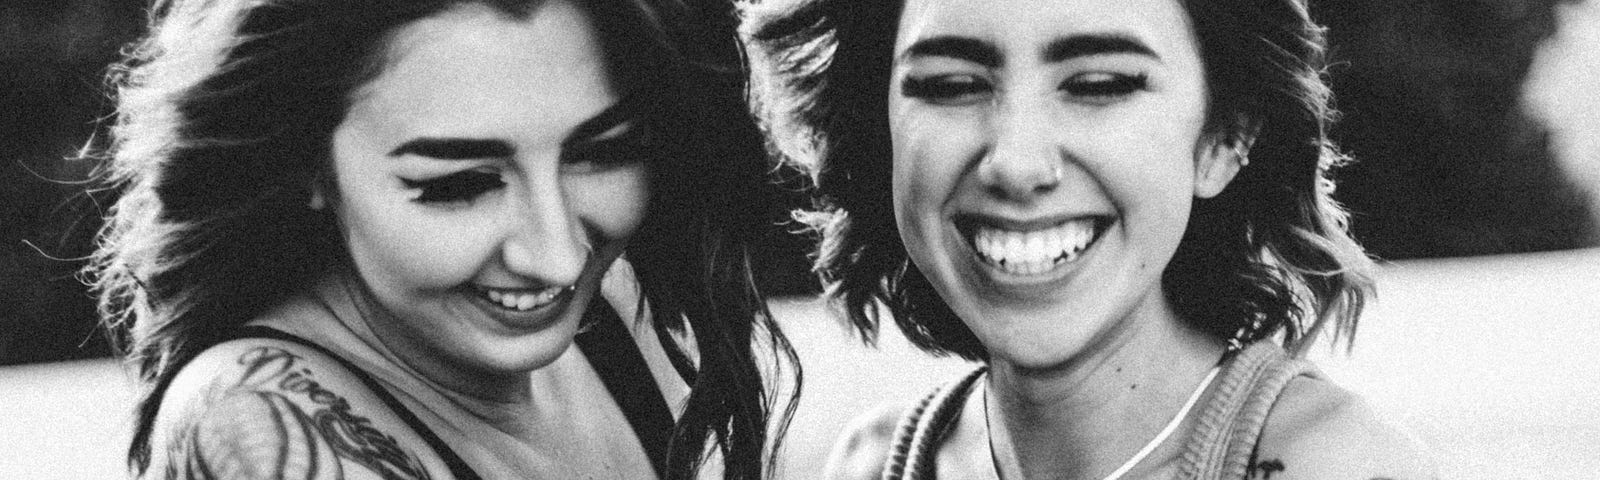 A laughing smiling couple of girlfriends in tatoos all in black and white, like a flashback.